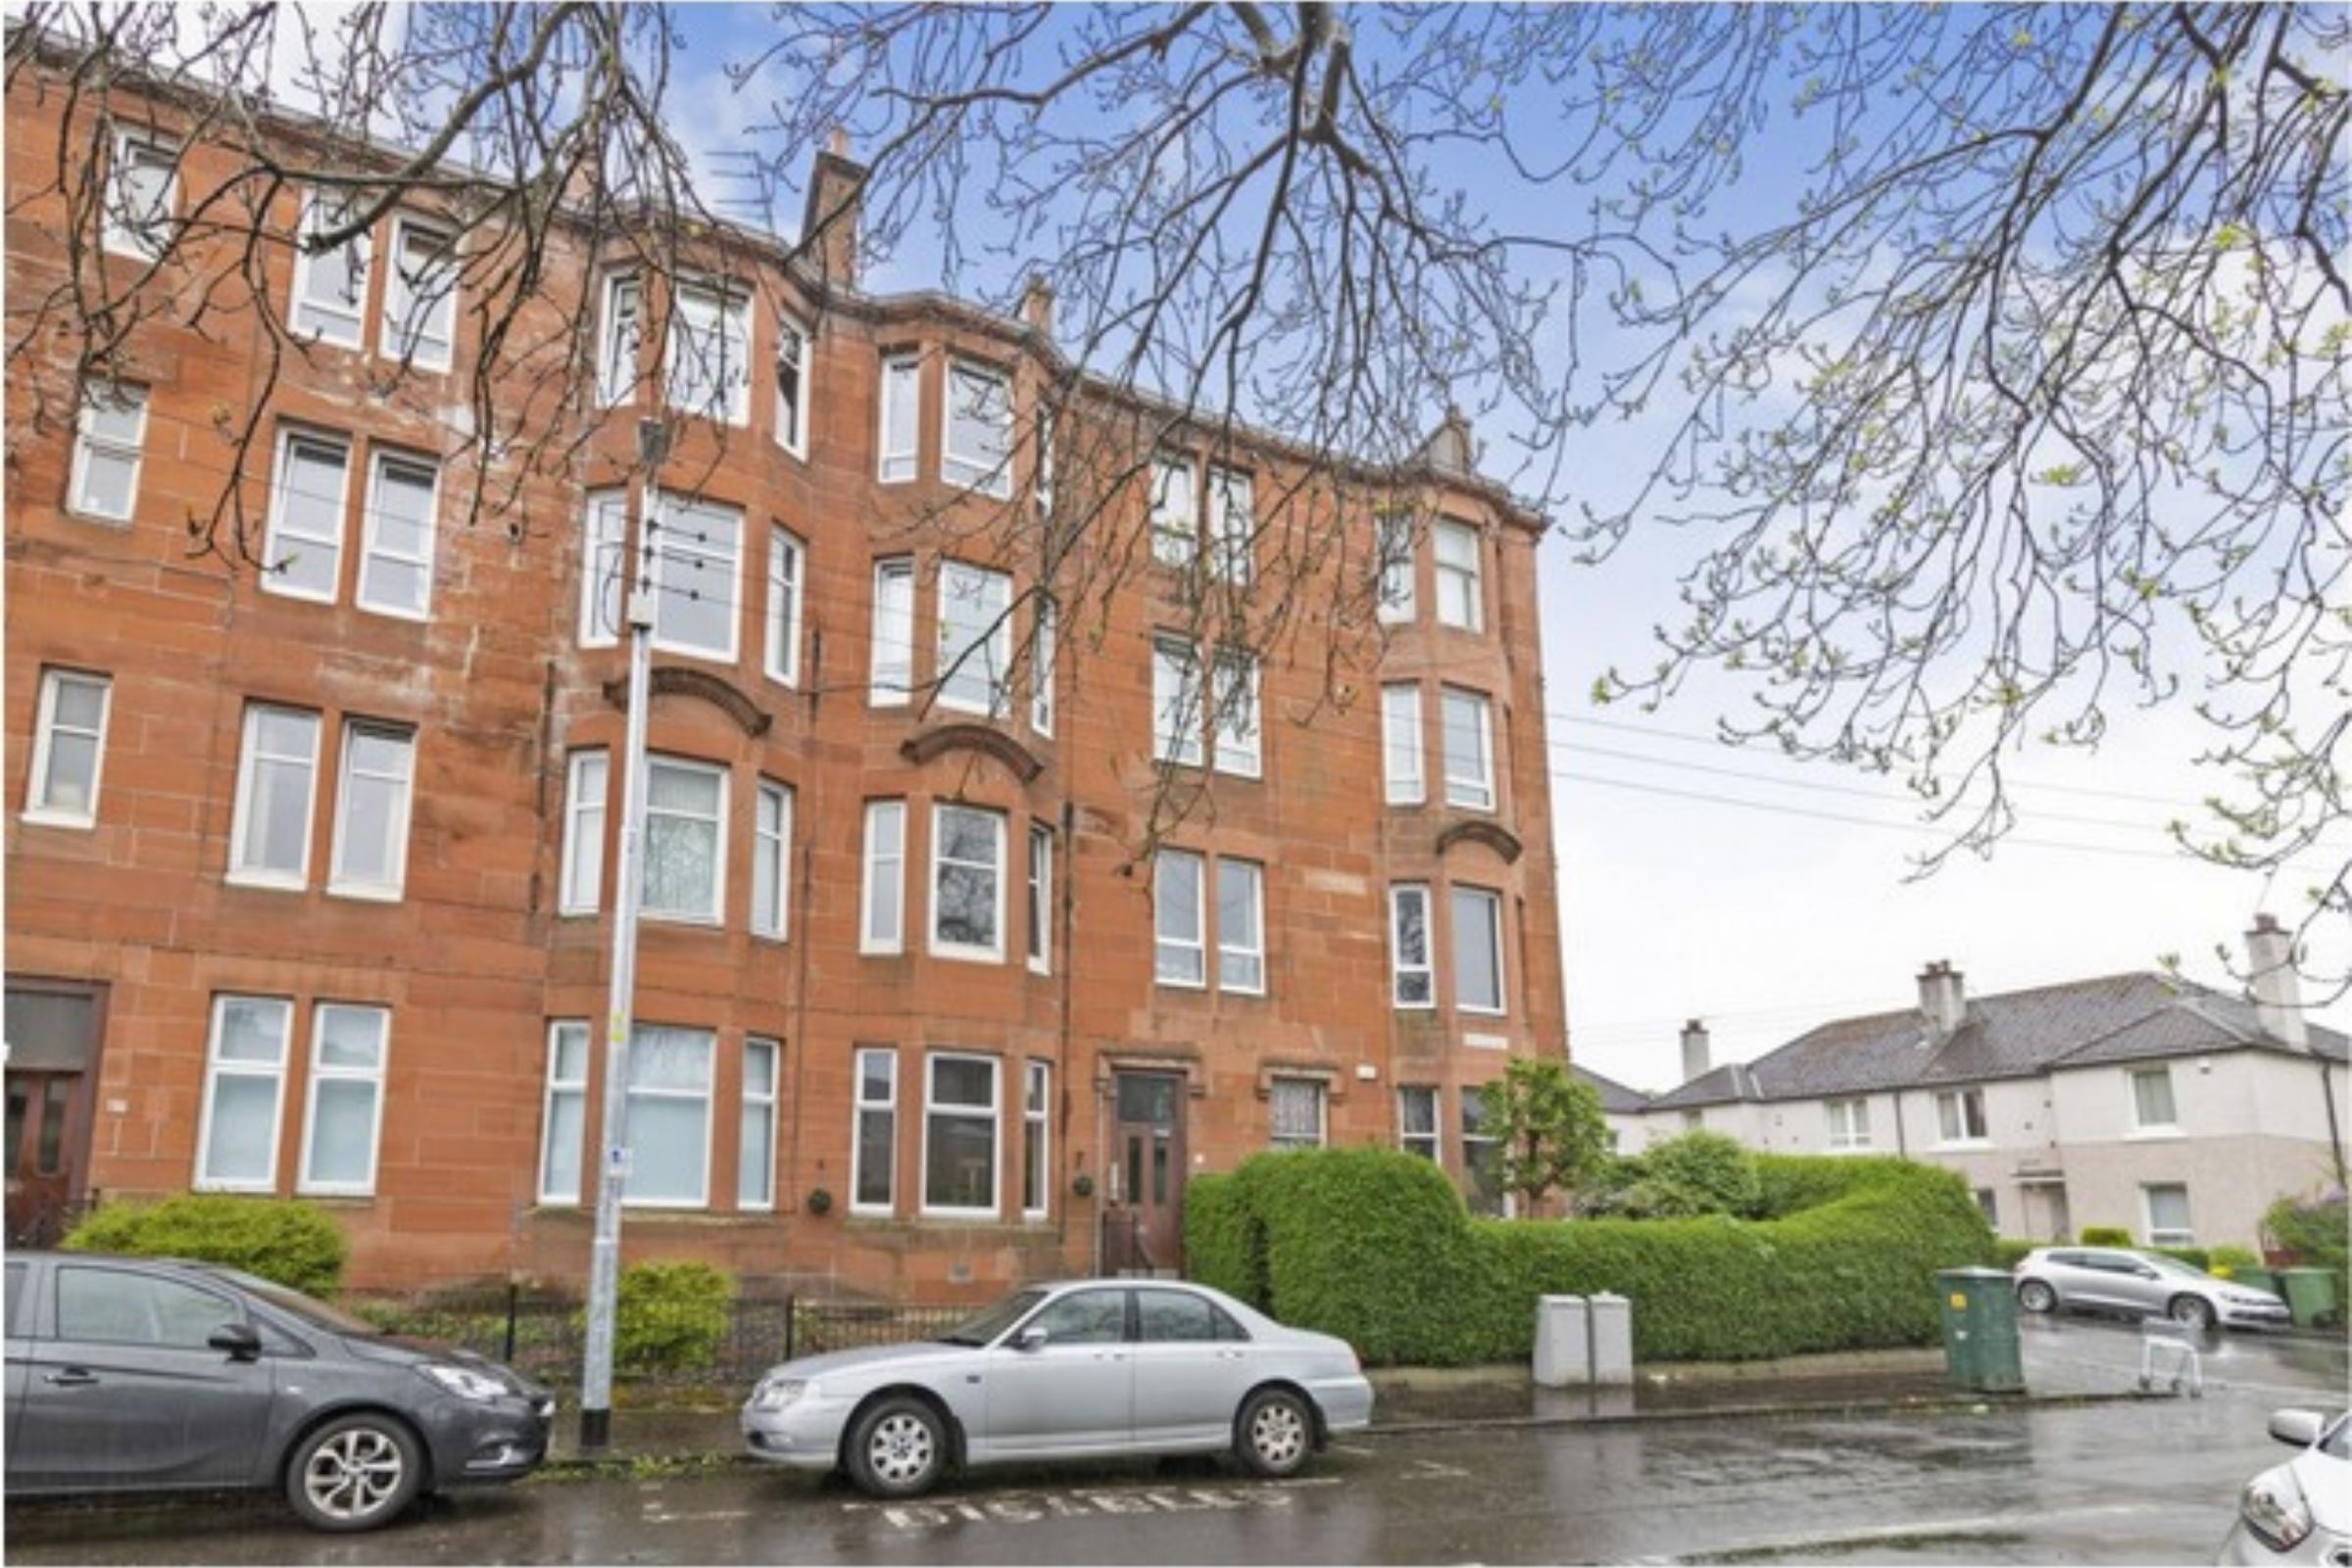 Glasgow flats for sale: One bedroom apartment available in Craigton